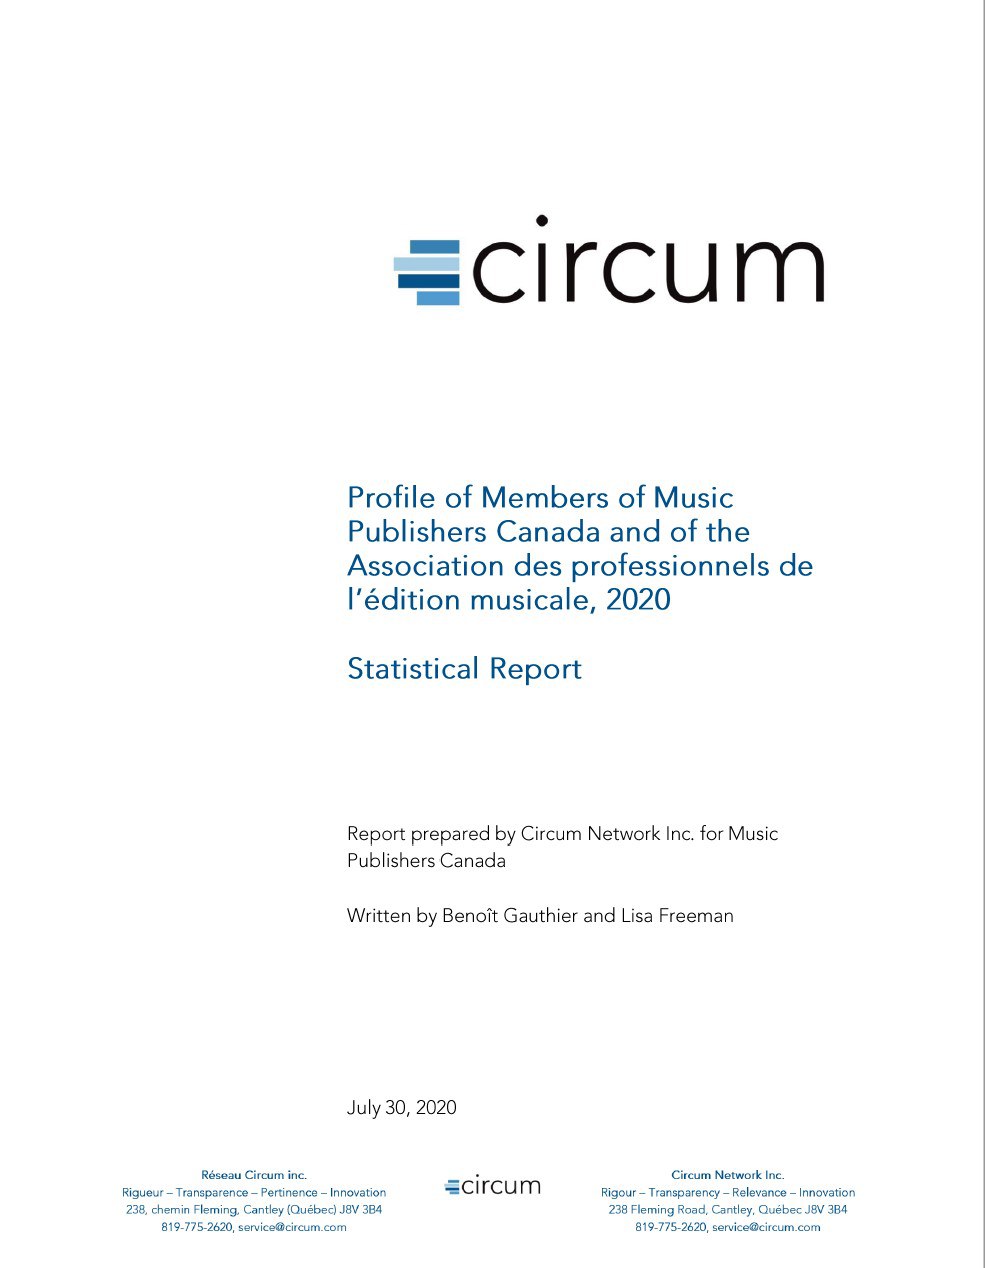 Profile of Members of Music Publishers Canada and of the Association des professionnels de l'édition musicale, 2020